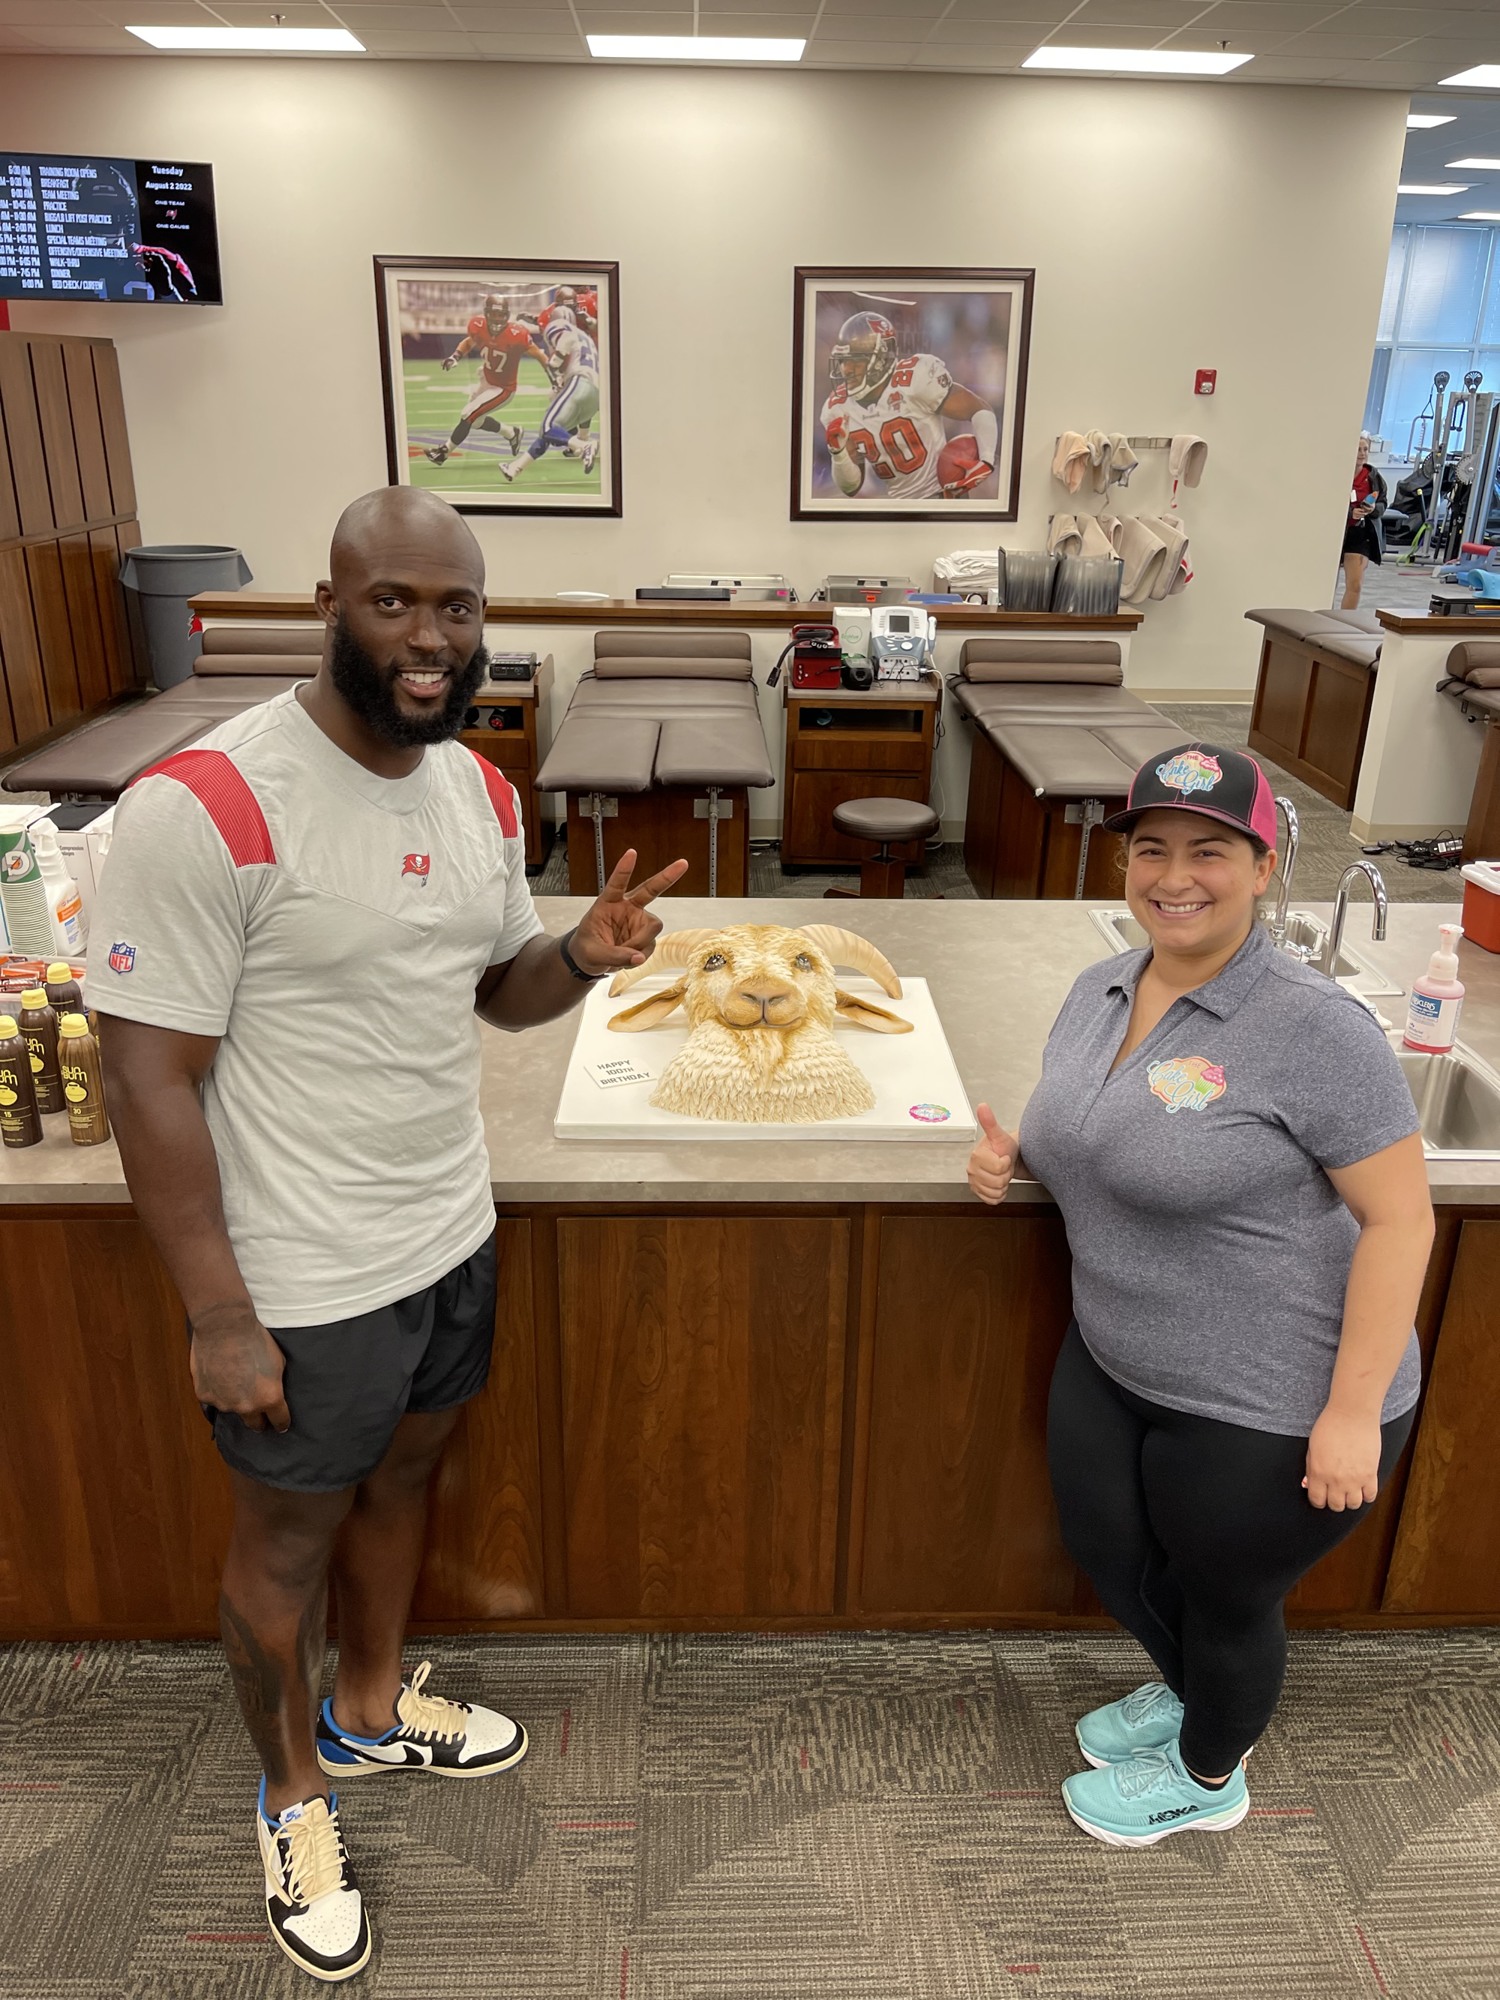 Tampa Bay Buccaneers running back Leonard Fournette, left, placed the order for the $800 GOAT cake, which was made by The Cake Girl's Kristina Lavallee. (Courtesy photo)